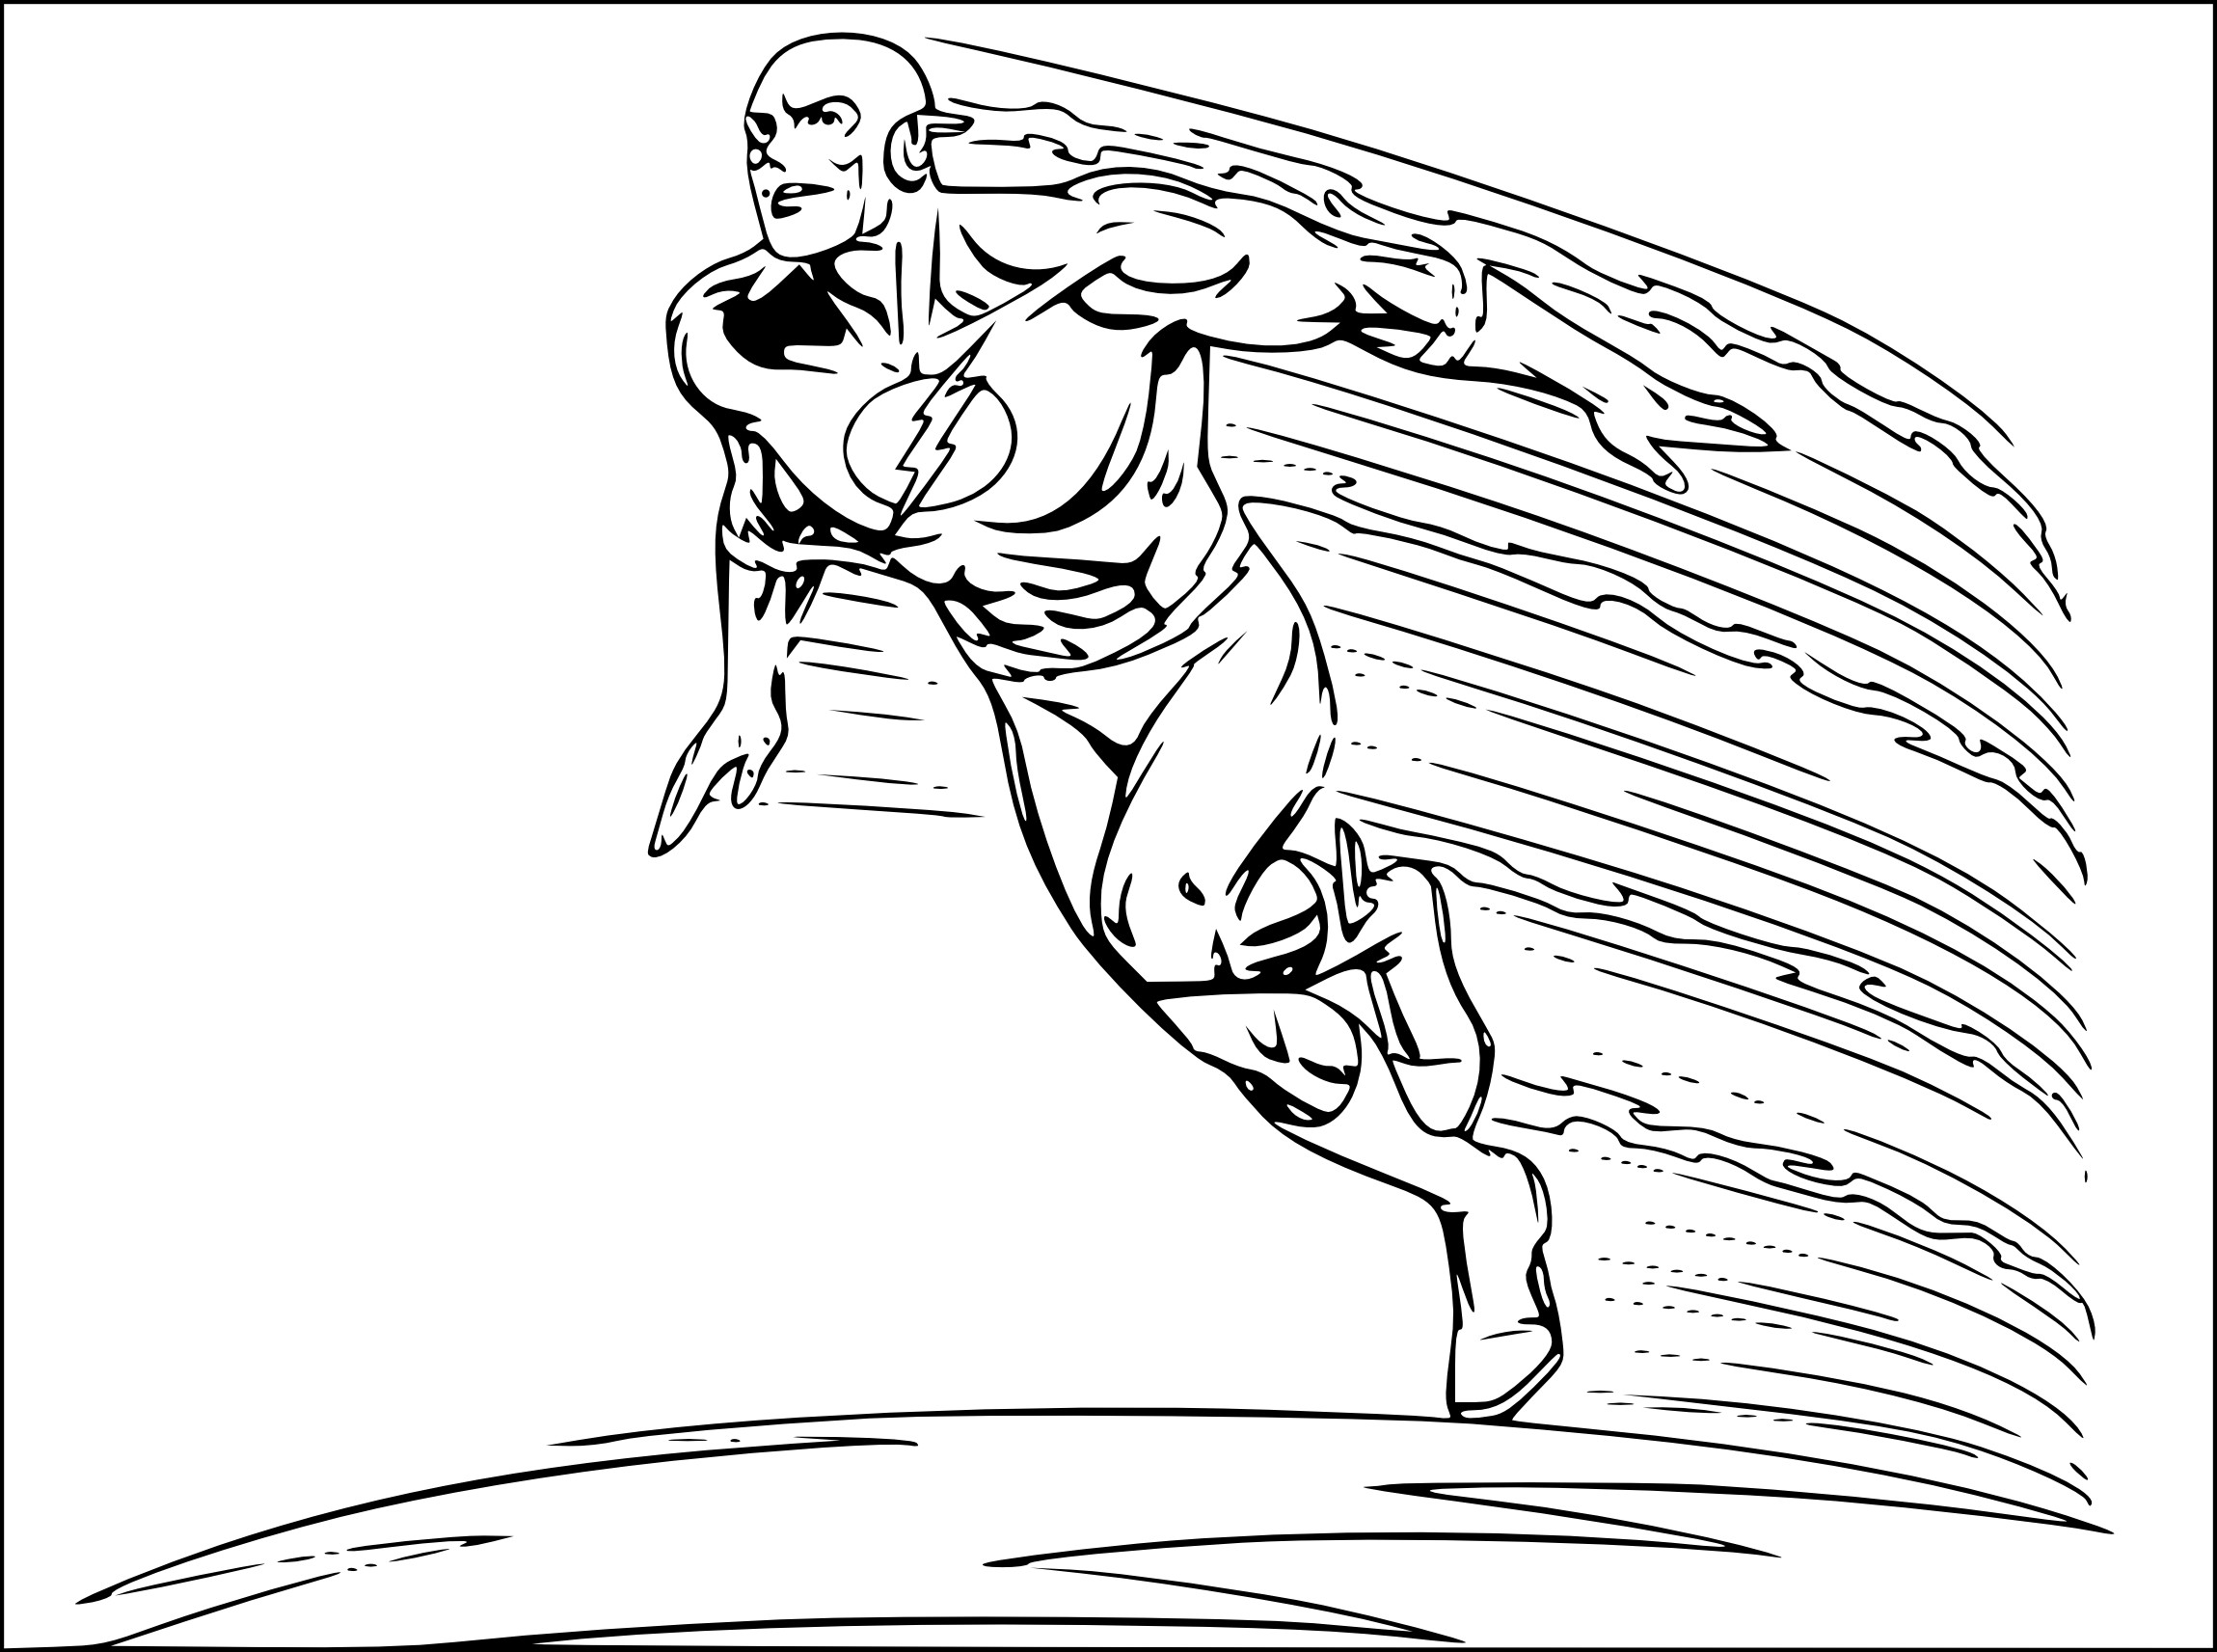 Quick Flash coloring page